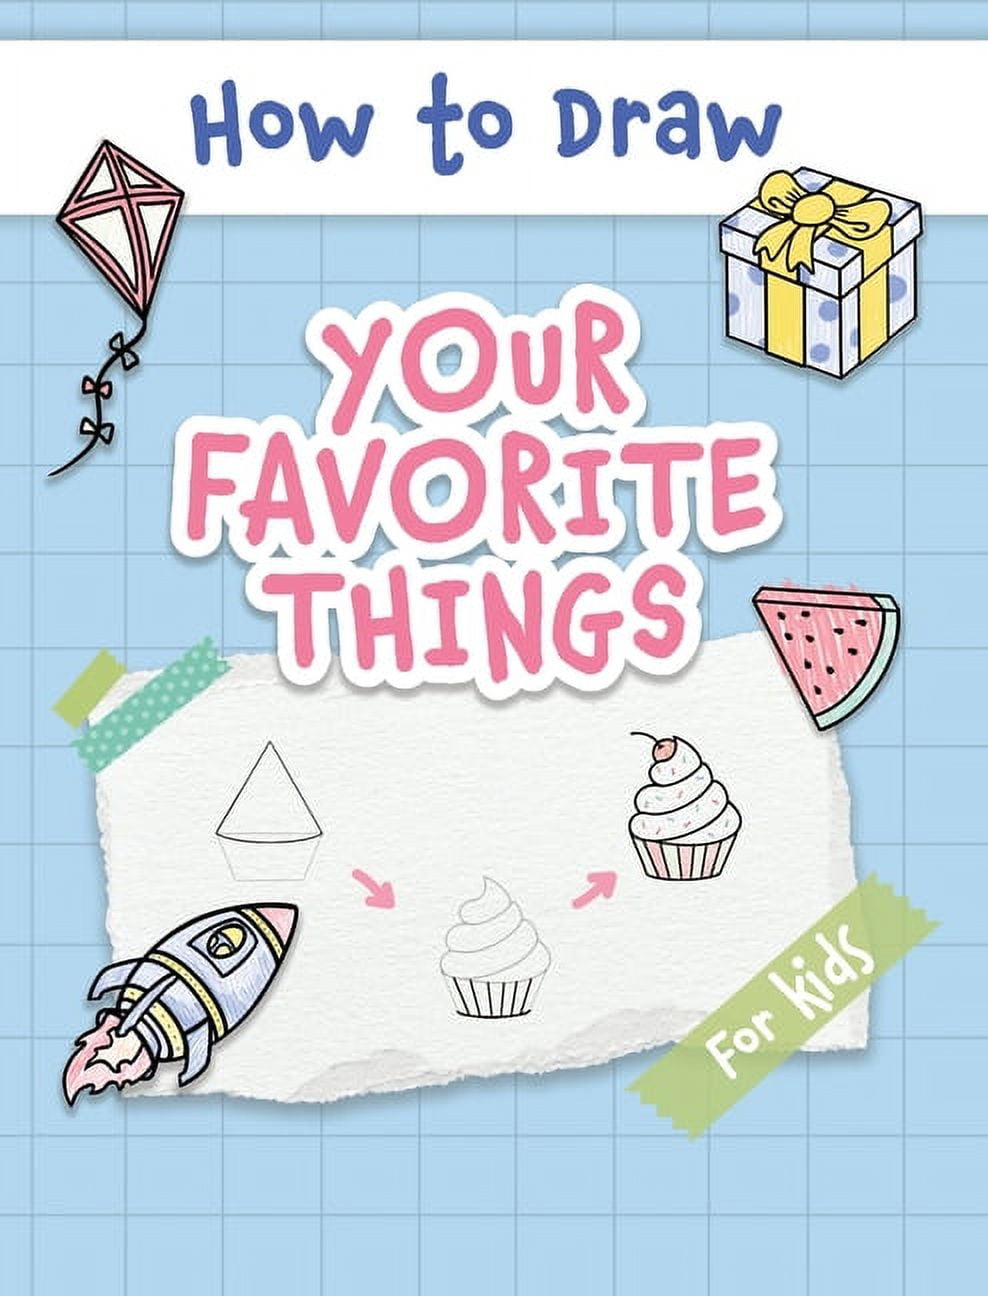 How to Draw Your Favorite Things: Easy and Simple Step-by-Step Guide to Drawing Cute Things for Beginners - the Perfect Christmas Or Birthday Gift [Book]